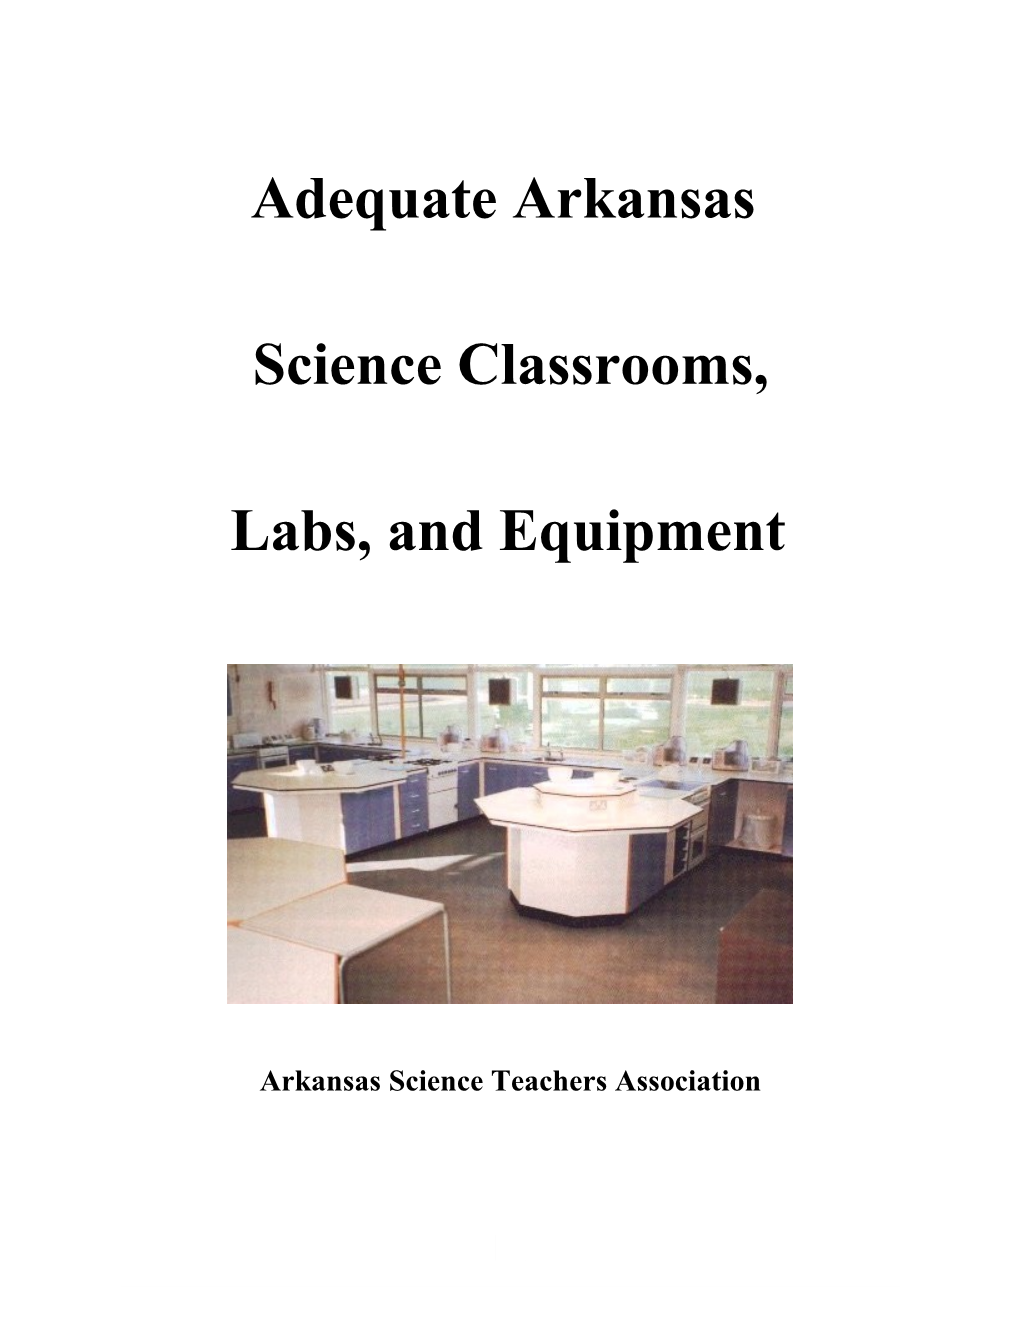 Goals for Adequate Science Classrooms, Labs and Equipment